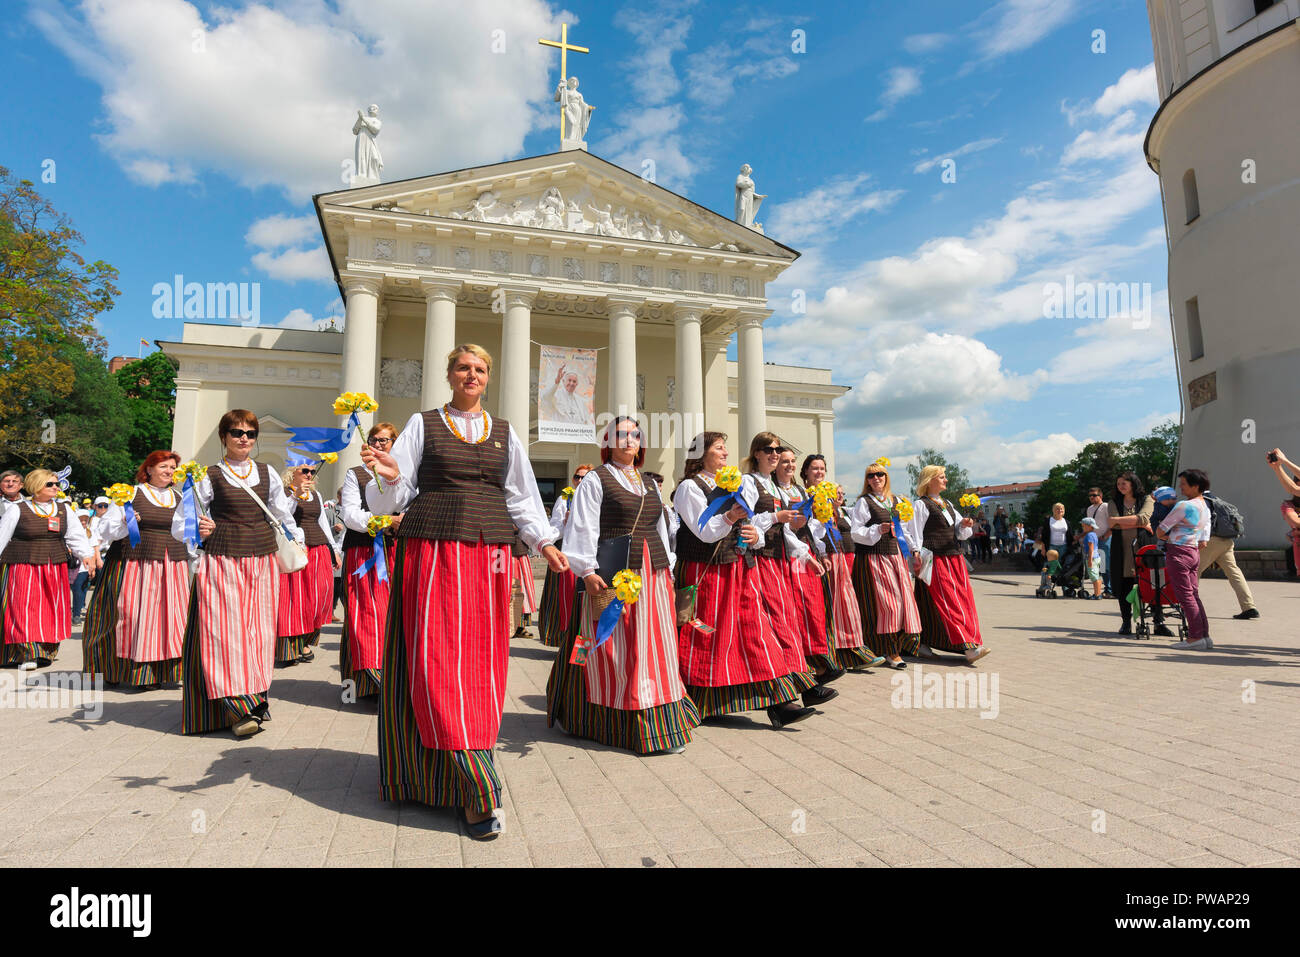 Lithuania festival, view of women wearing traditional costume parading through Cathedral Square in the Lithuania Song and Dance Festival in Vilnius. Stock Photo